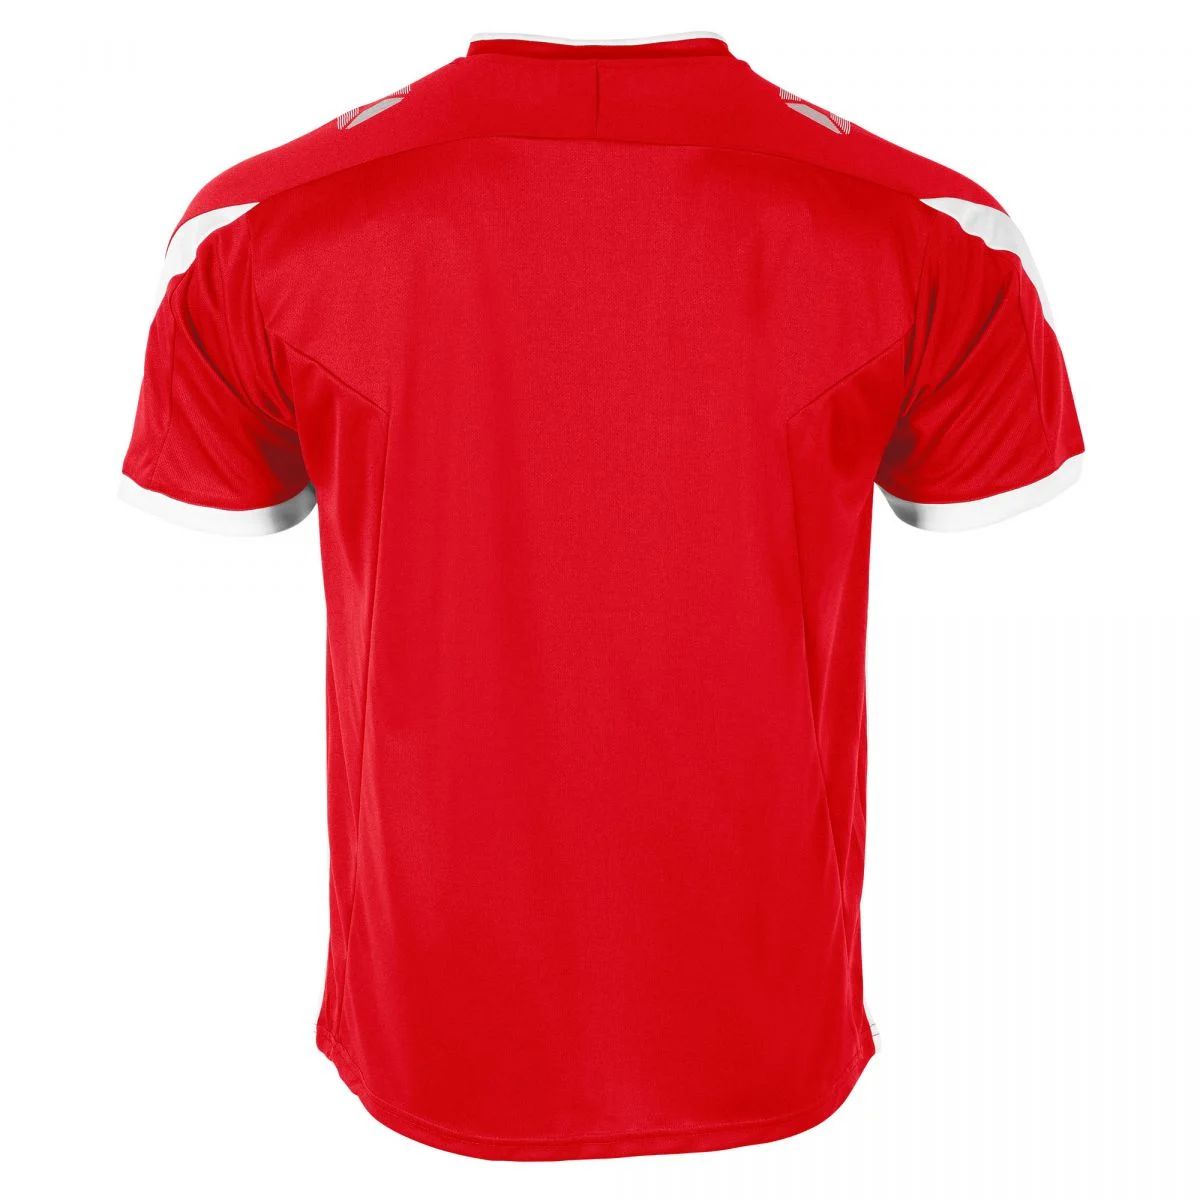 Stanno - Drive Shirt - Red & White